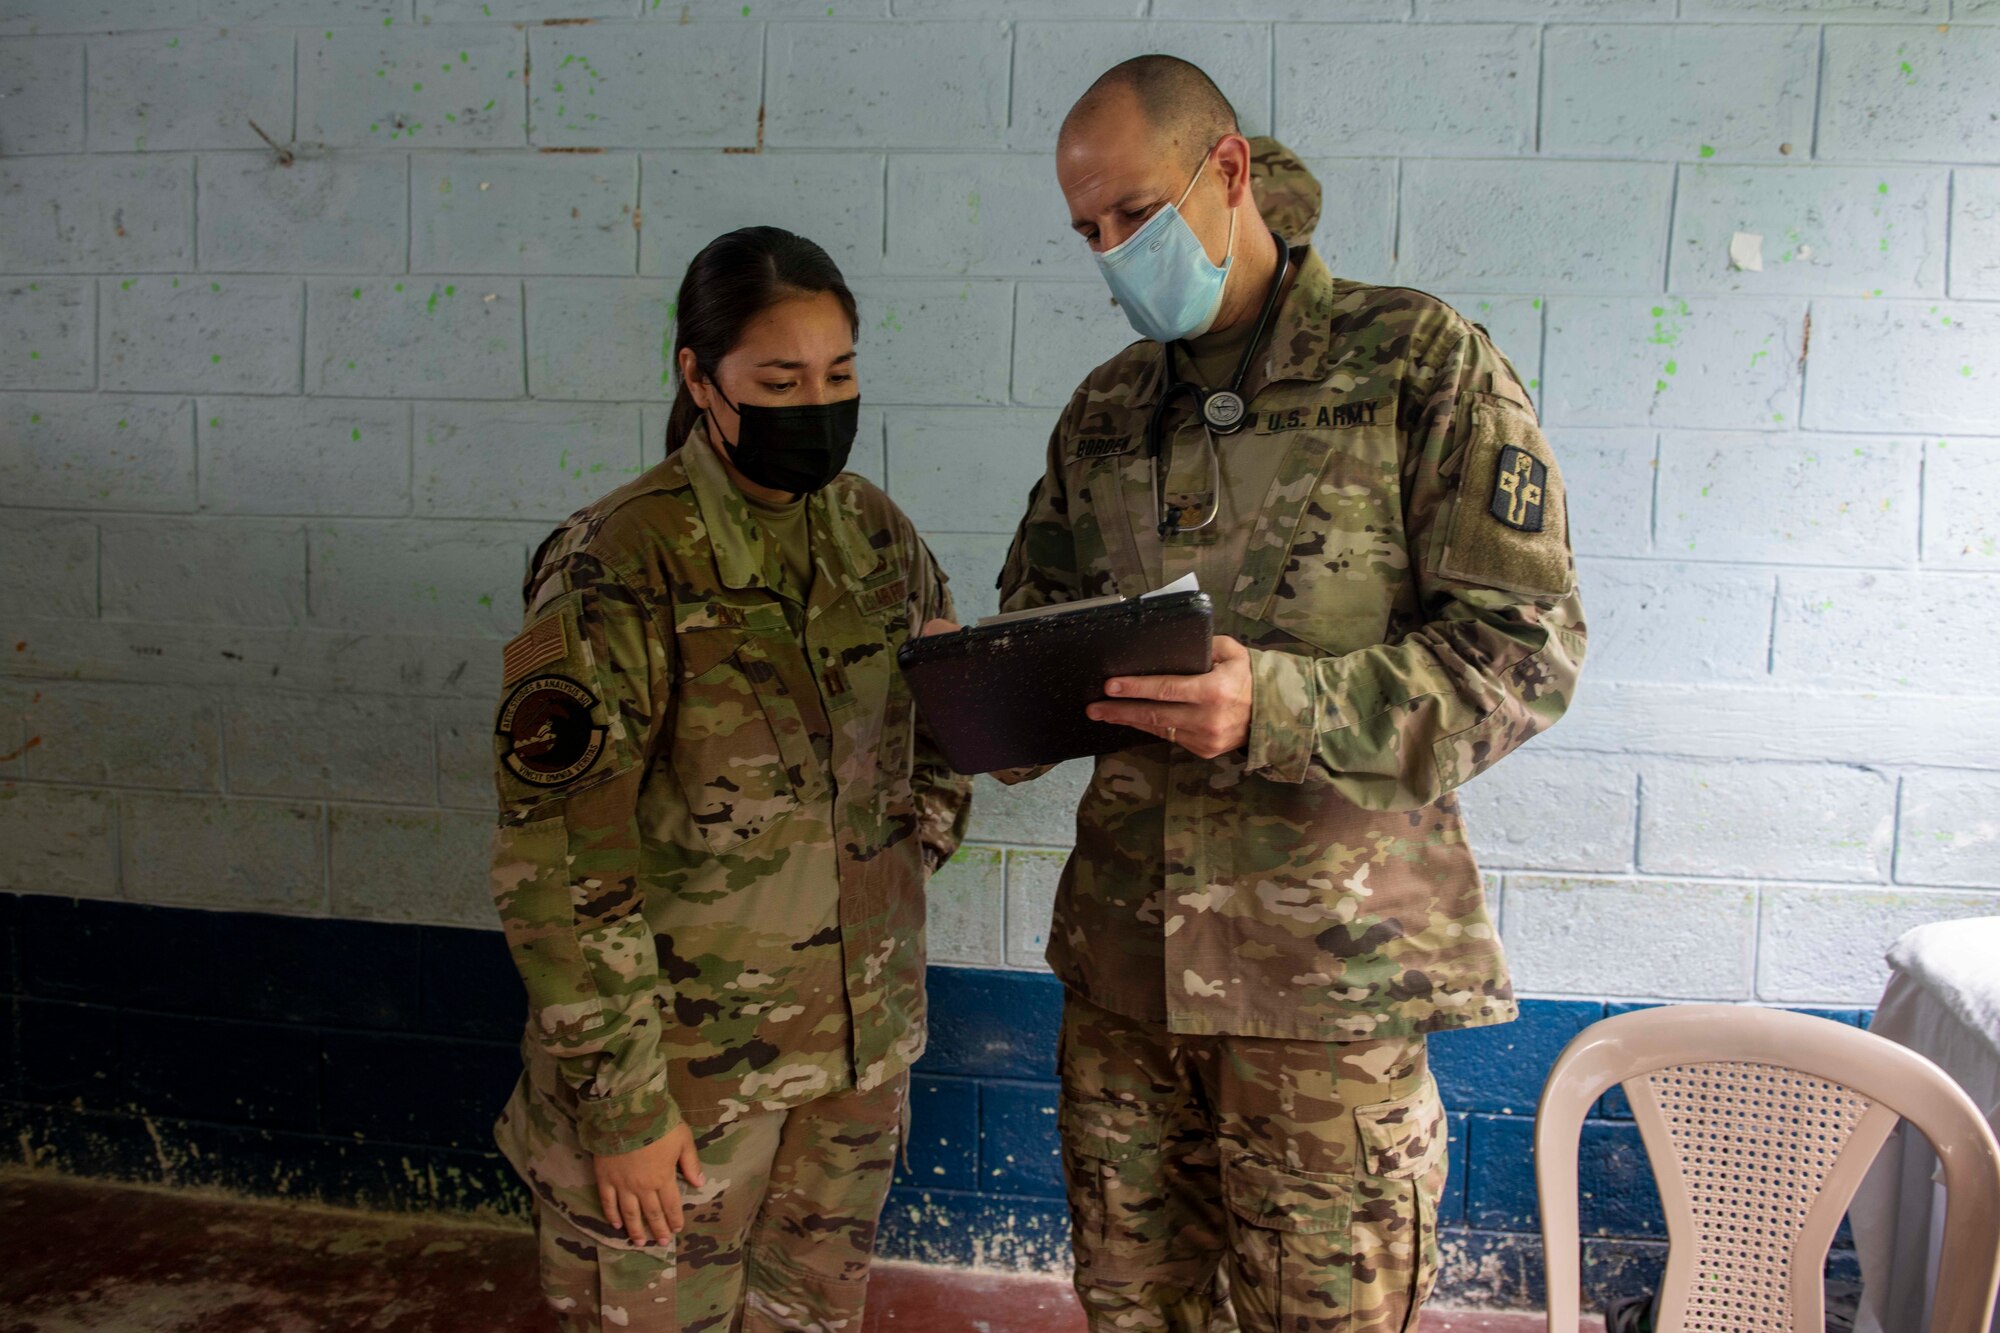 U.S. Air Force Capt. Jennifer Buck, an operations research analyst from the Studies and Analysis Squadron at Joint Base San Antonio-Randolph, Texas, and U.S. Army Maj. Nathan Borden, an emergency medicine M.D., with the 228th Combat Support Hospital of Joint Base San Antonio, Texas, review a patient’s chart during Resolute Sentinel 21 in Melchor De Mencos, Guatemala, June 17, 2021. Buck’s evaluations help account for proper staffing, planning prescription lists, and how to conduct similar missions in the future.